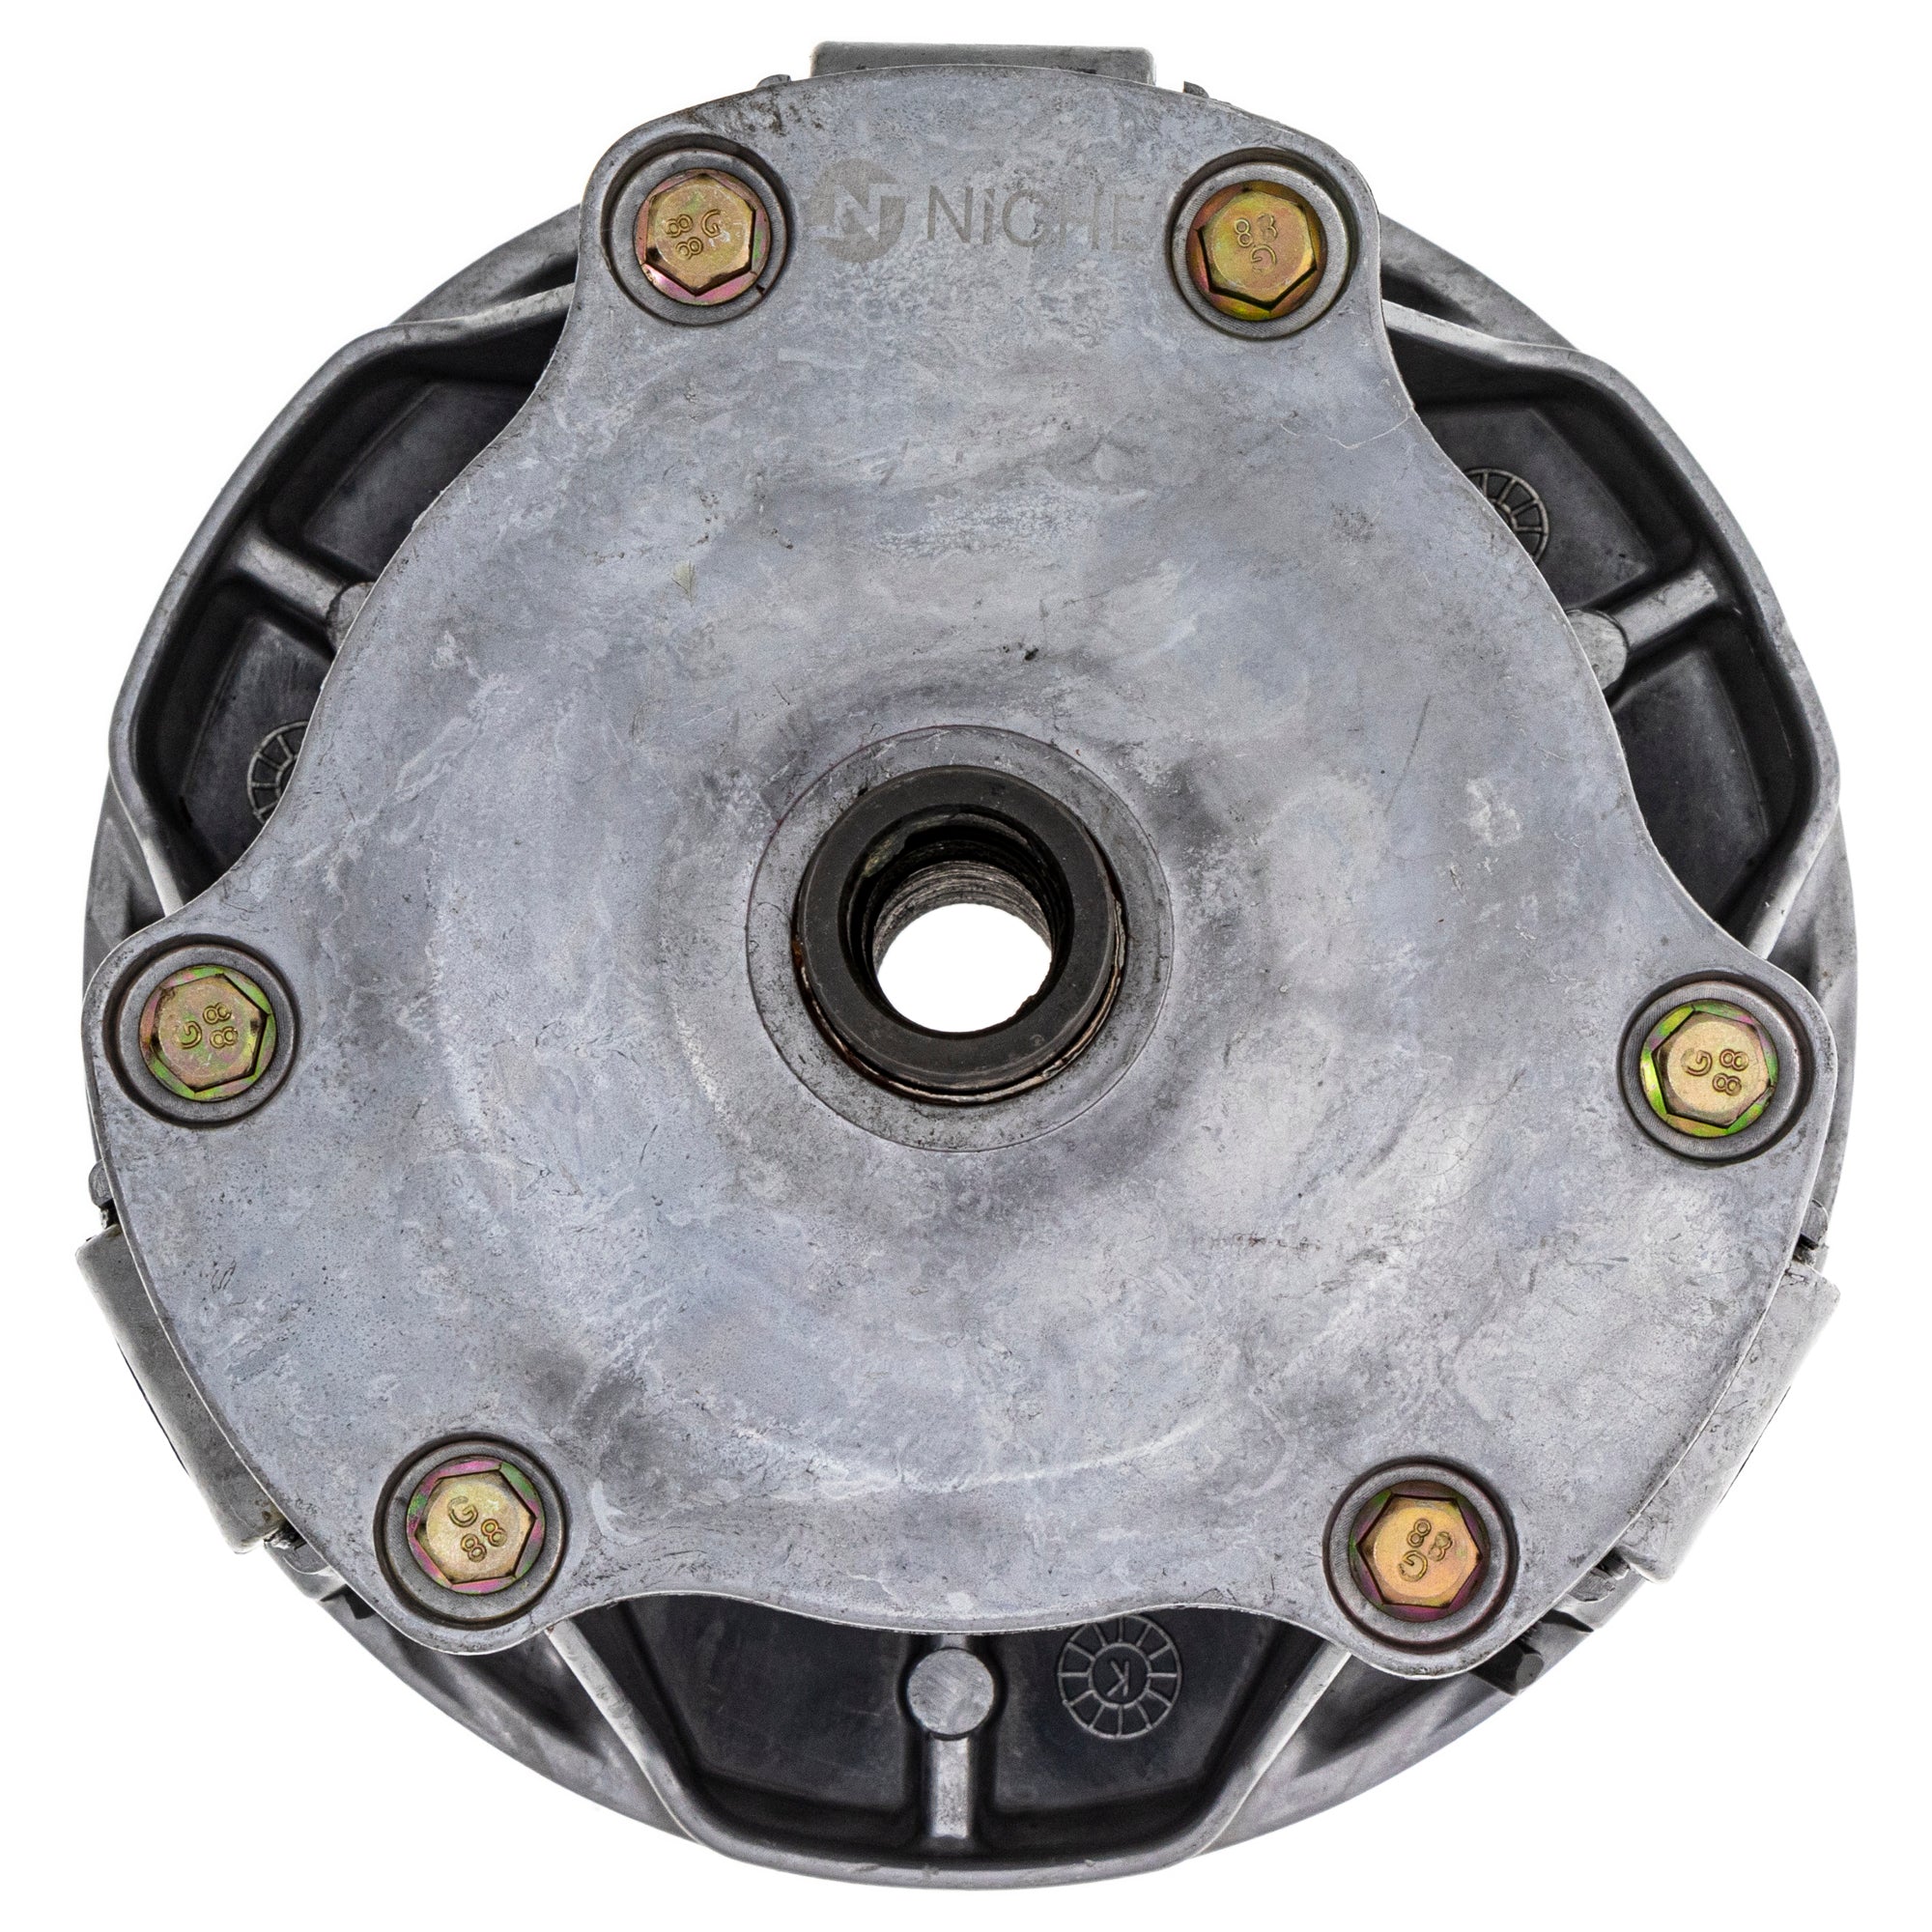 Primary Drive Clutch For Polaris 1321633 1321632 1321618 1321605 1321522 1321519 1321509 1321506